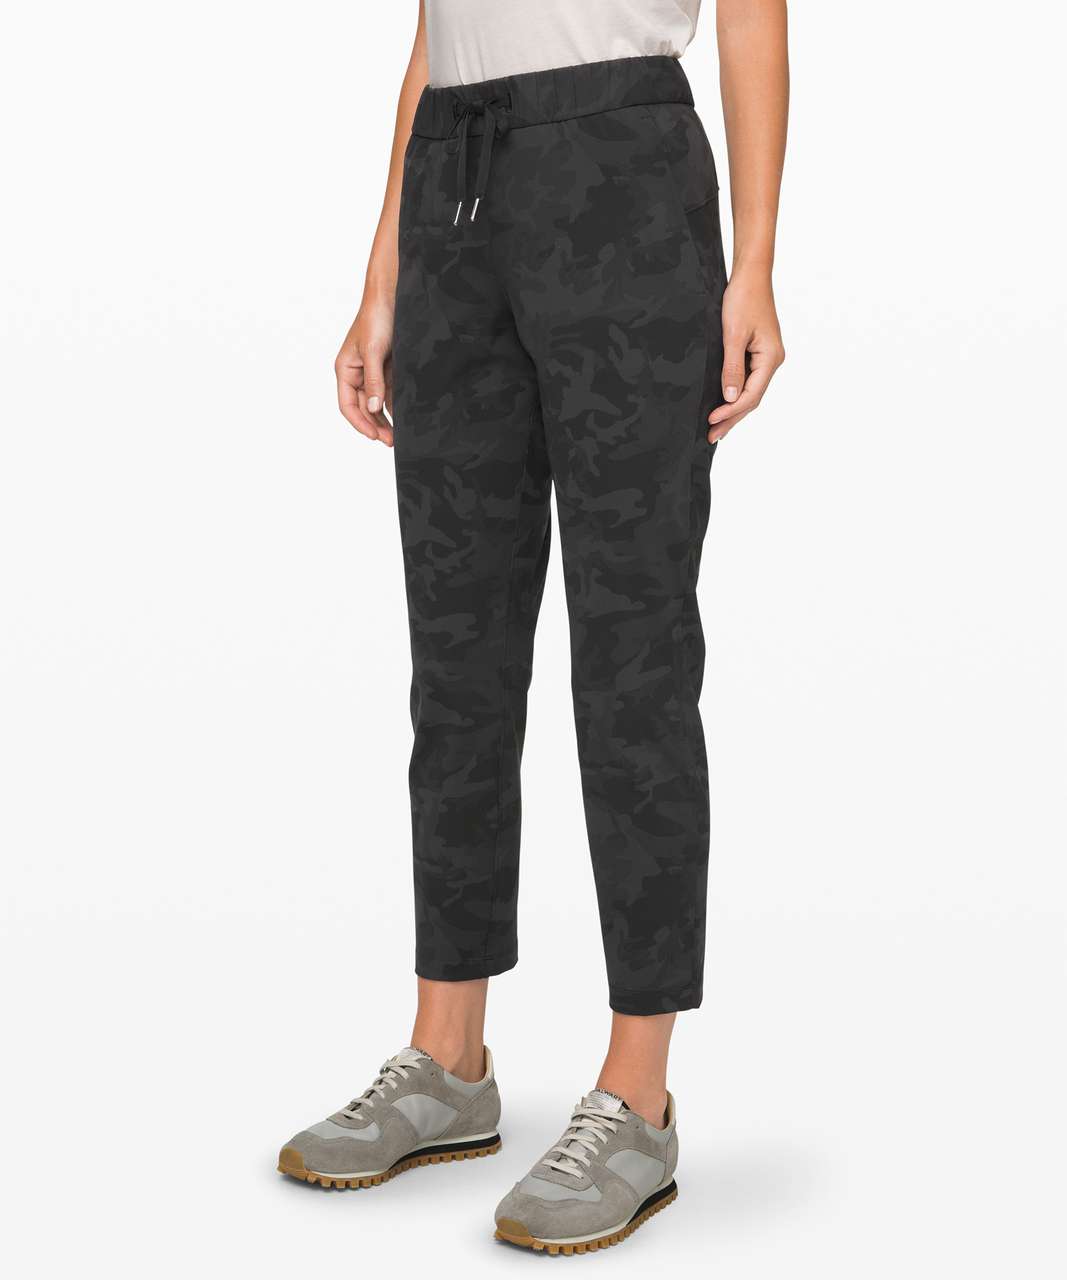 Lululemon On the Fly 7/8 Pant - Incognito Camo Multi Grey